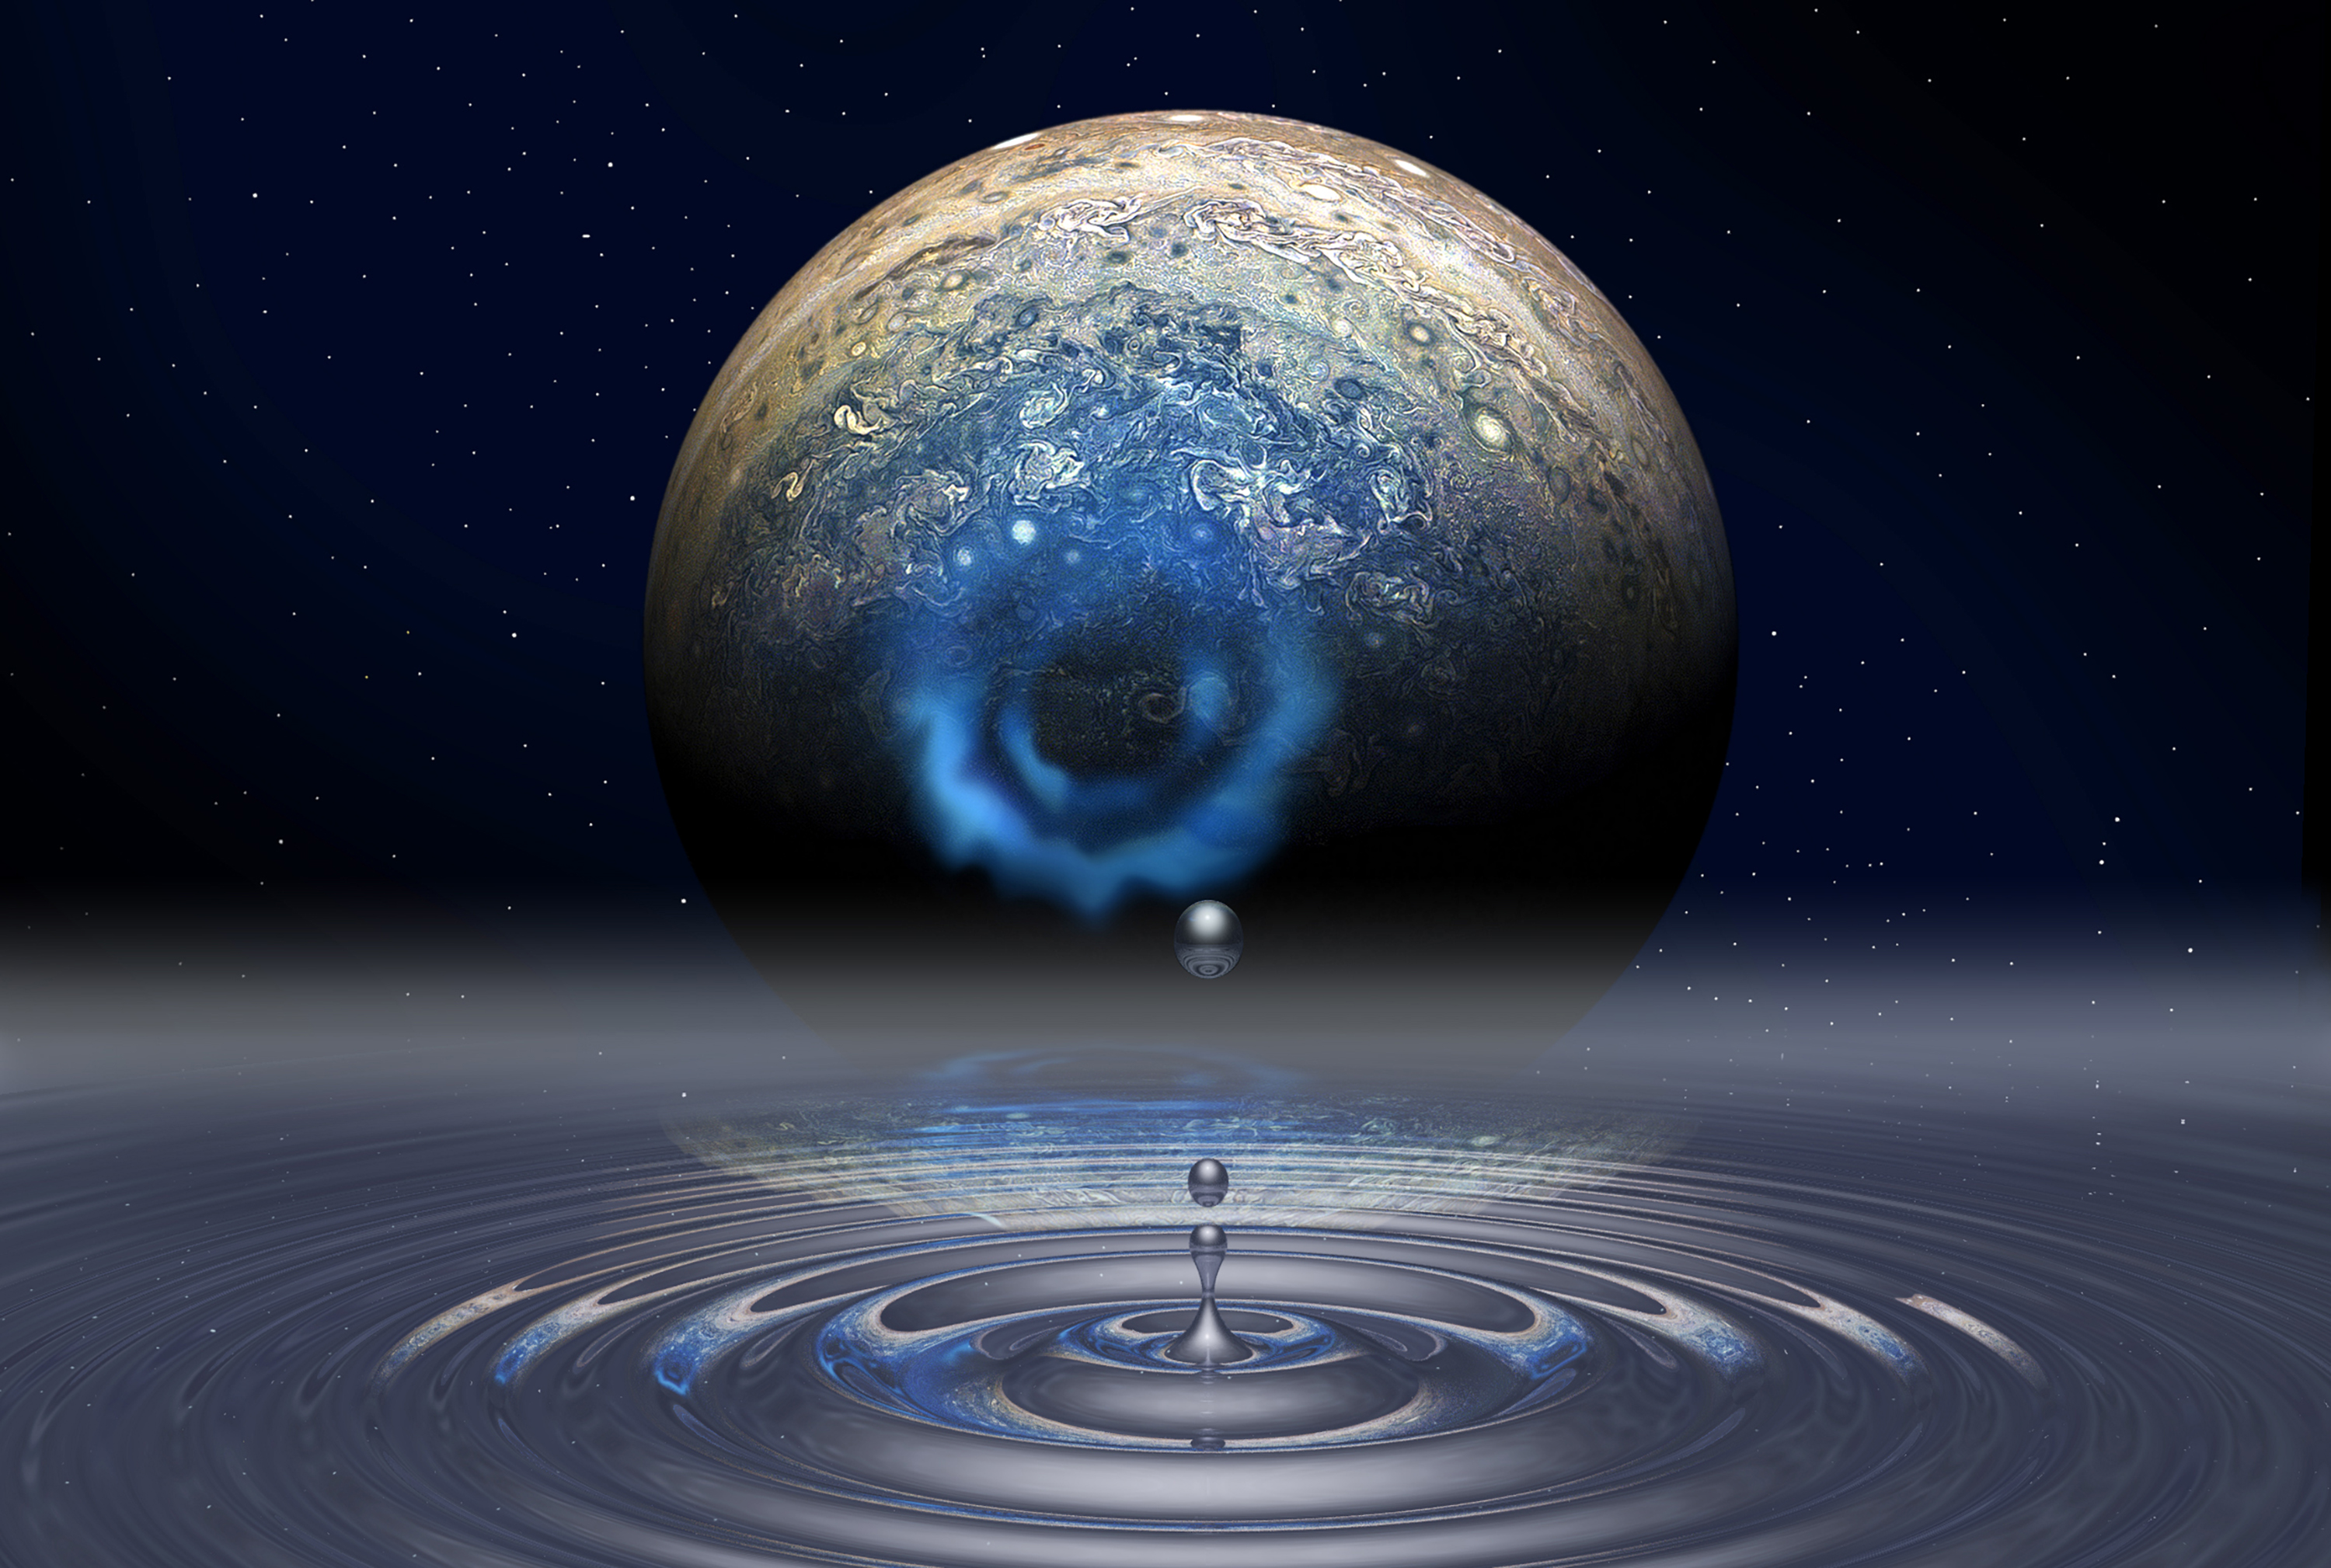 Unraveling the properties of fluid metallic hydrogen could help scientists unlock the mysteries of Jupiter’s formation and internal structure. Credit: Mark Meamber, LLNL.